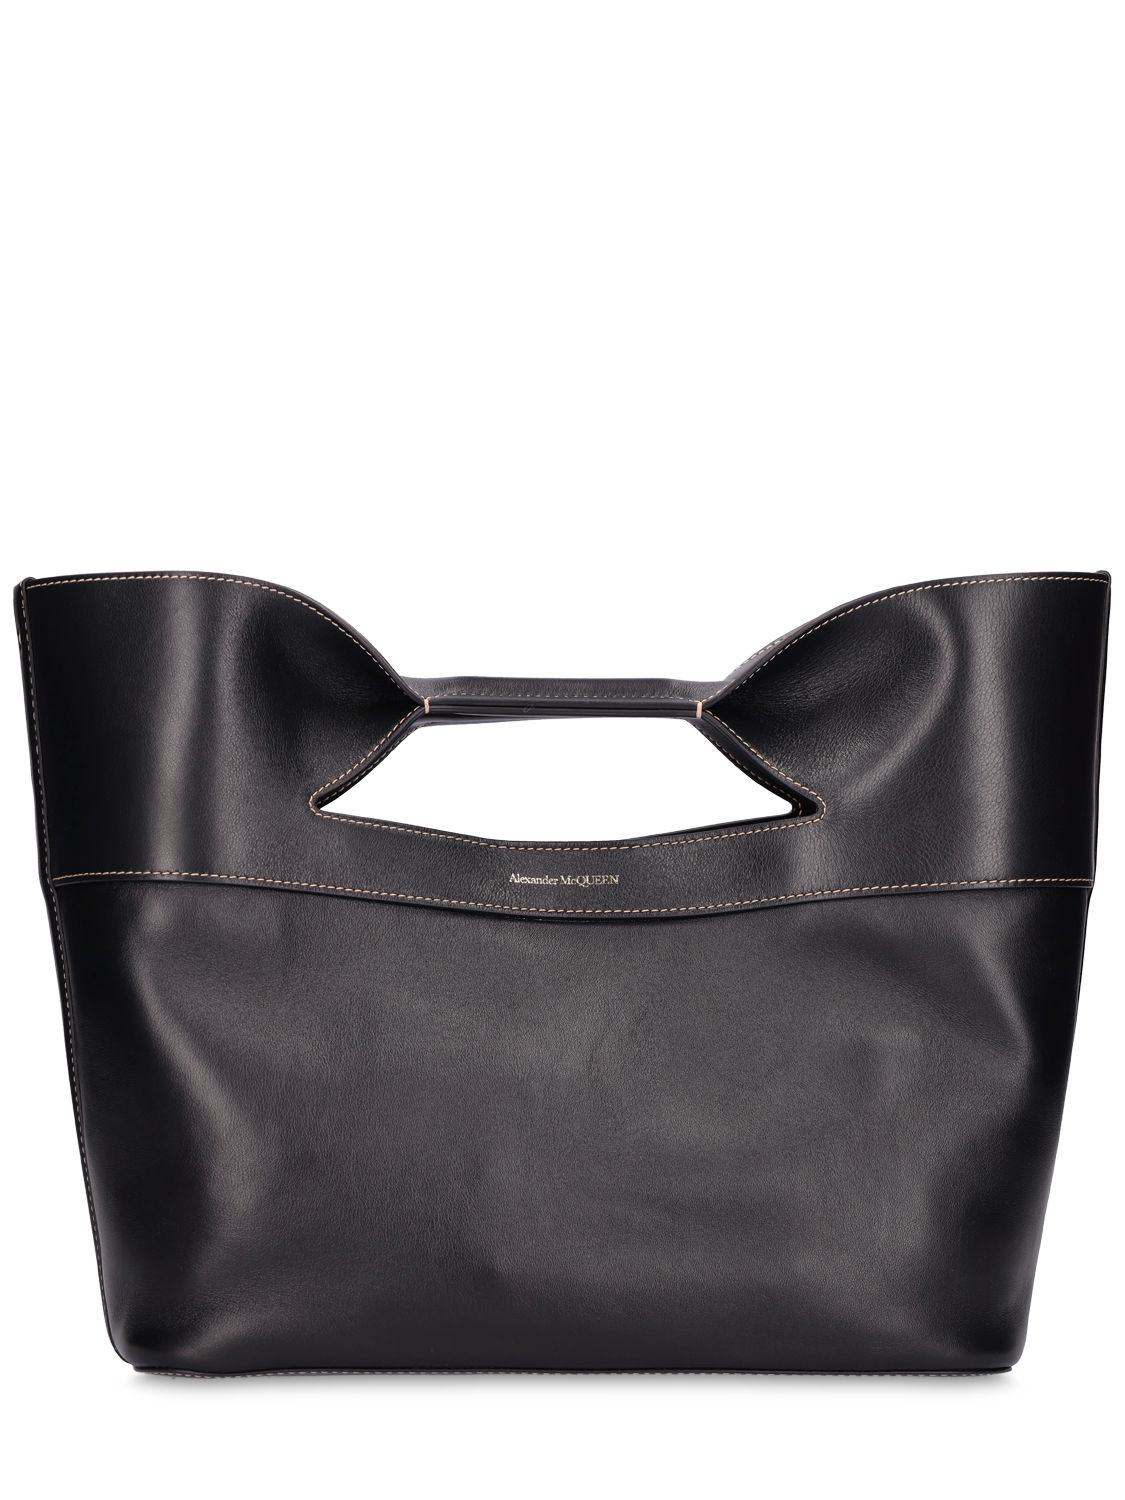 The Bow Small Leather Tote